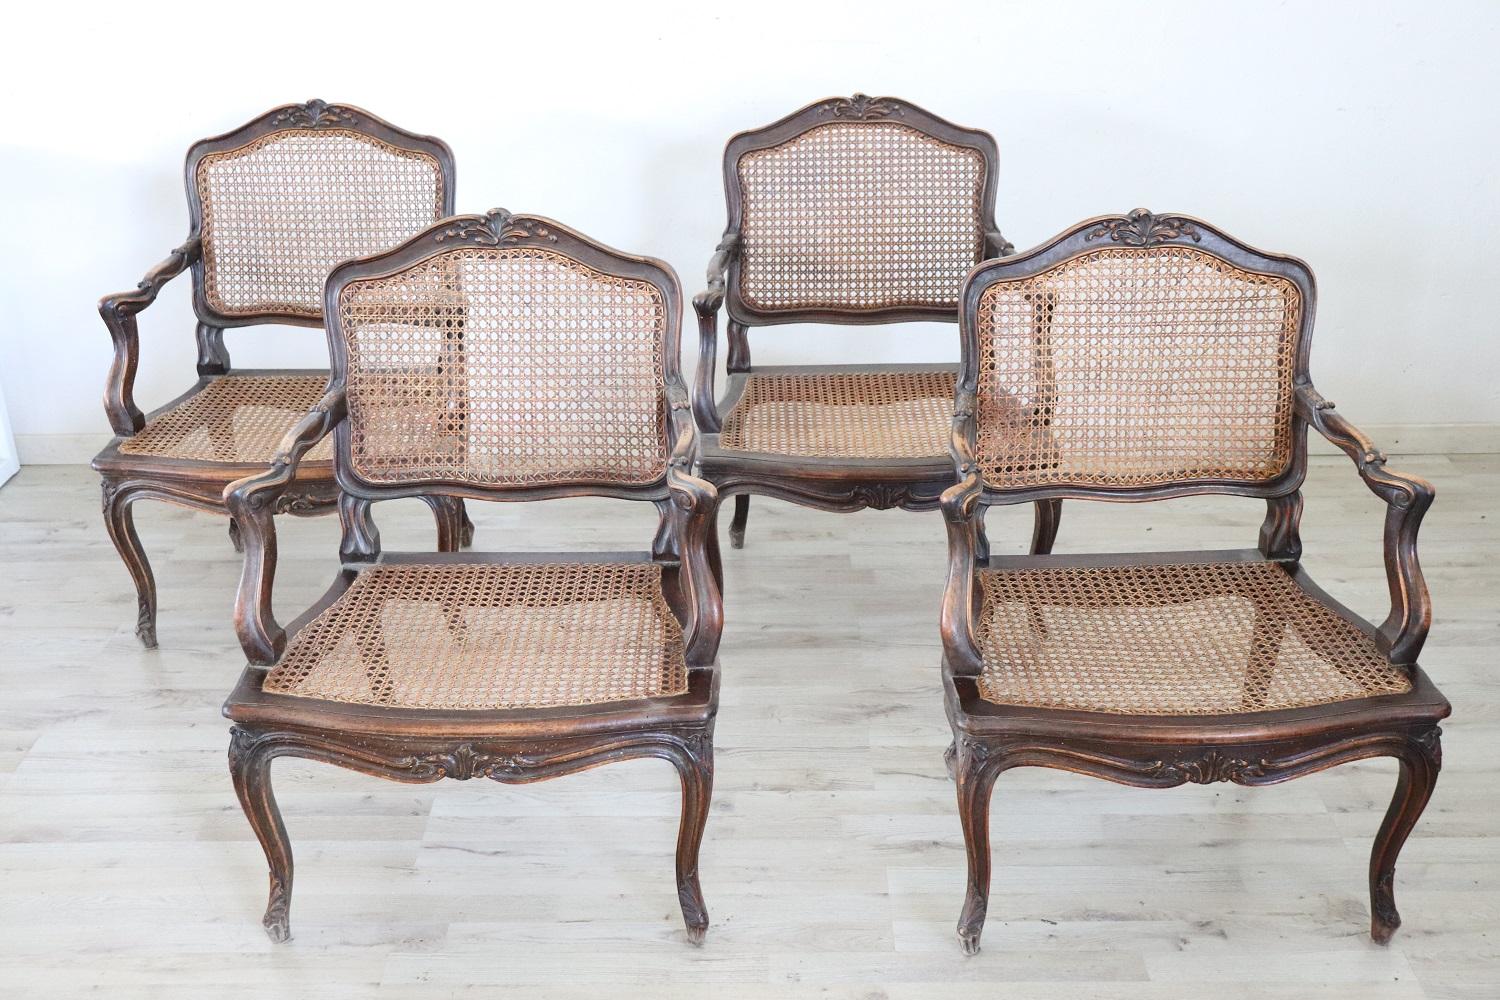 Very rare series of four armchairs production of Italy cabinetmakers in Louis XV style, 1880s. Beautiful wavy line with encabriole legs. Of great value is the original Vienna straw on the back and seat made with the ancient hand-woven method. Wide